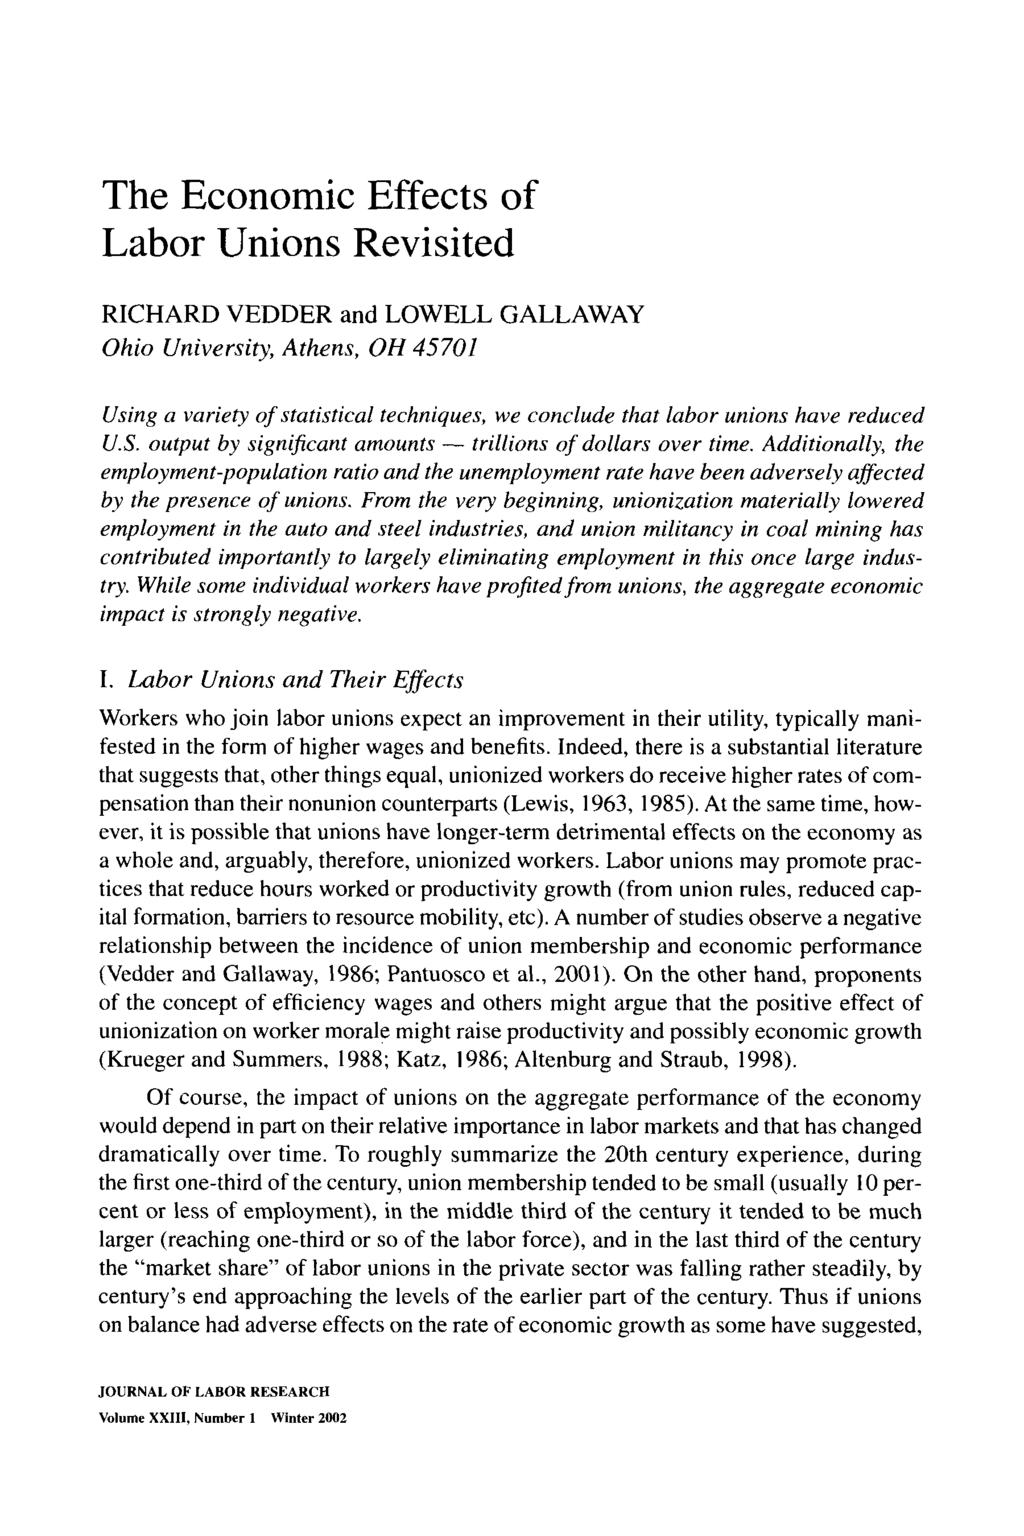 The Economic Effects of Labor Unions Revisited RICHARD VEDDER and LOWELL GALLAWAY Ohio University, Athens, OH 4570l Using a variety of statistical techniques, we conclude that labor unions have